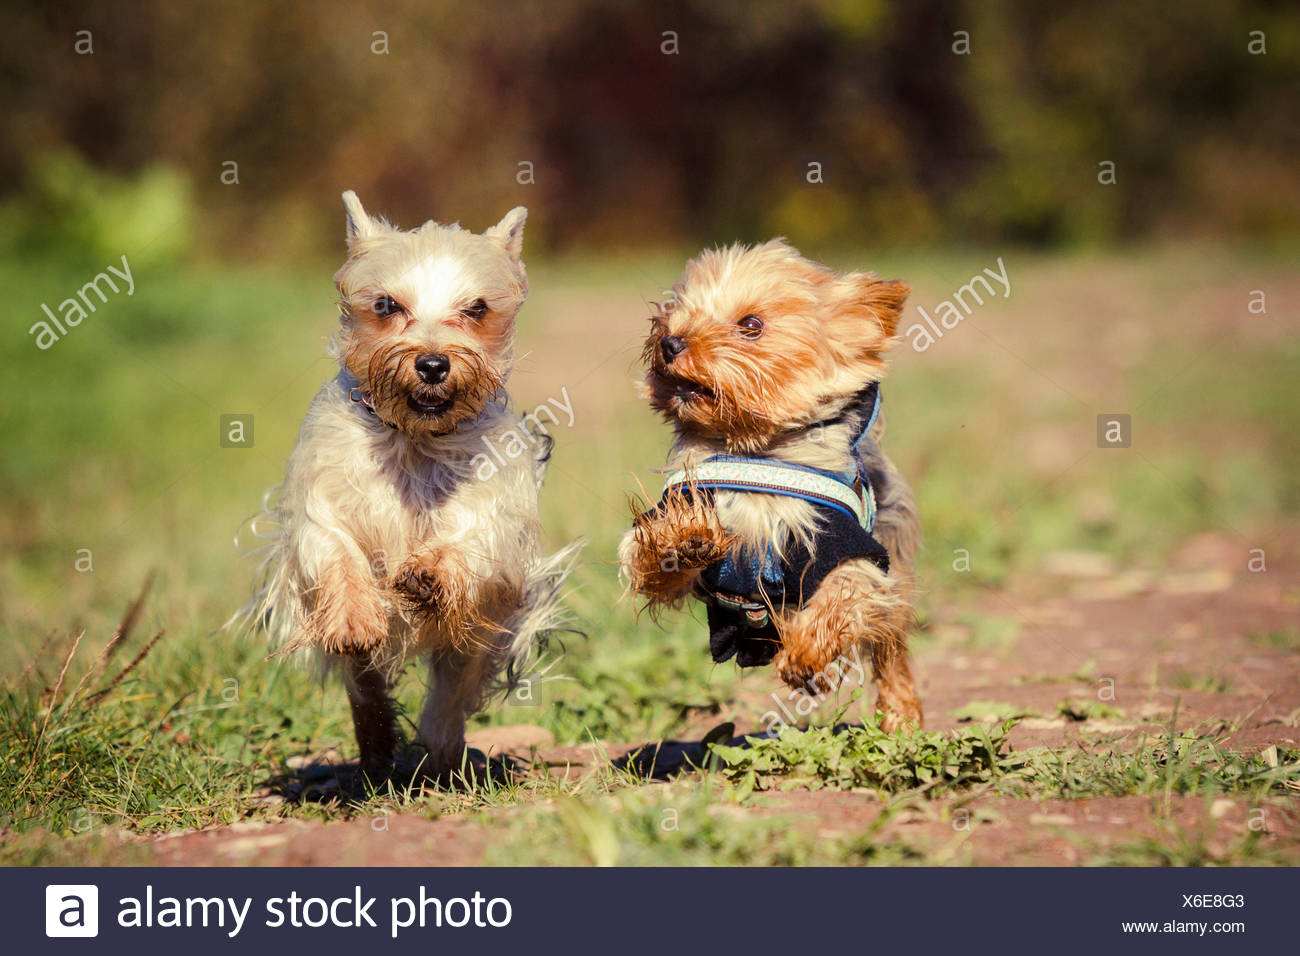 Yorkshire Terrier And An Australian Silky Terrier Running Next To Each Other Stock Photo Alamy